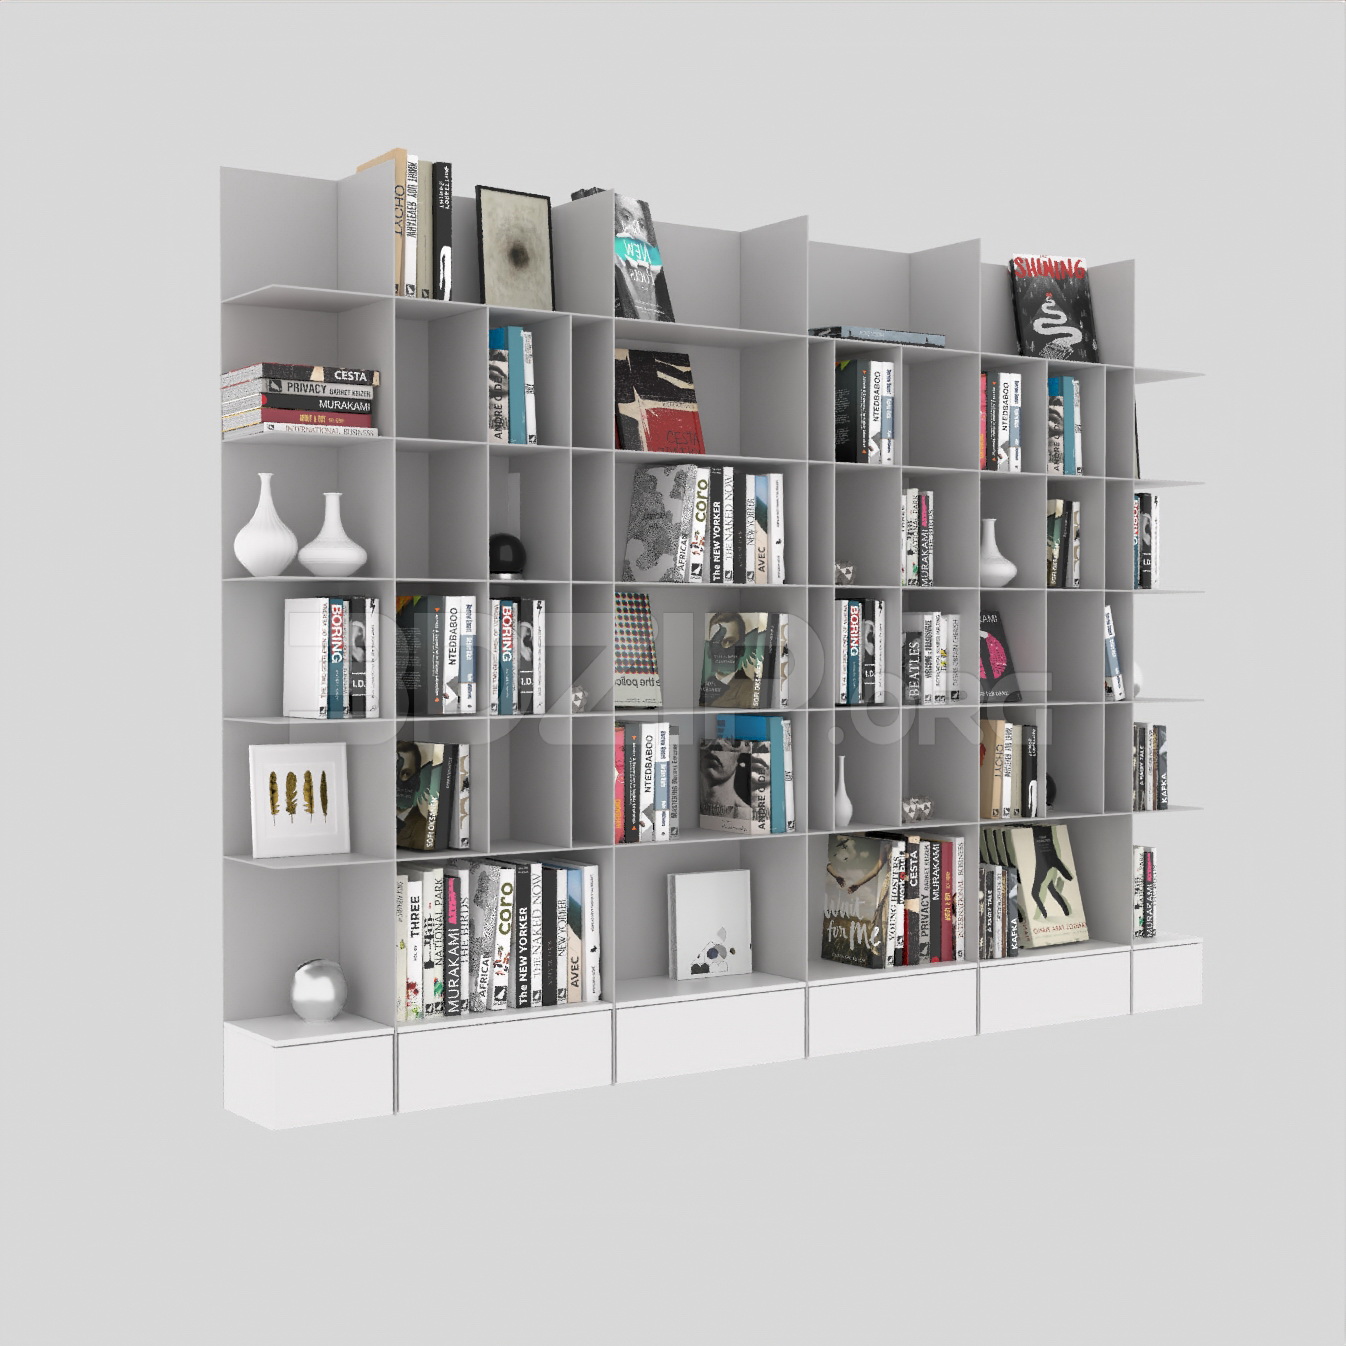 10569. Download Free Bookcase Model By Nguyen The Dinh